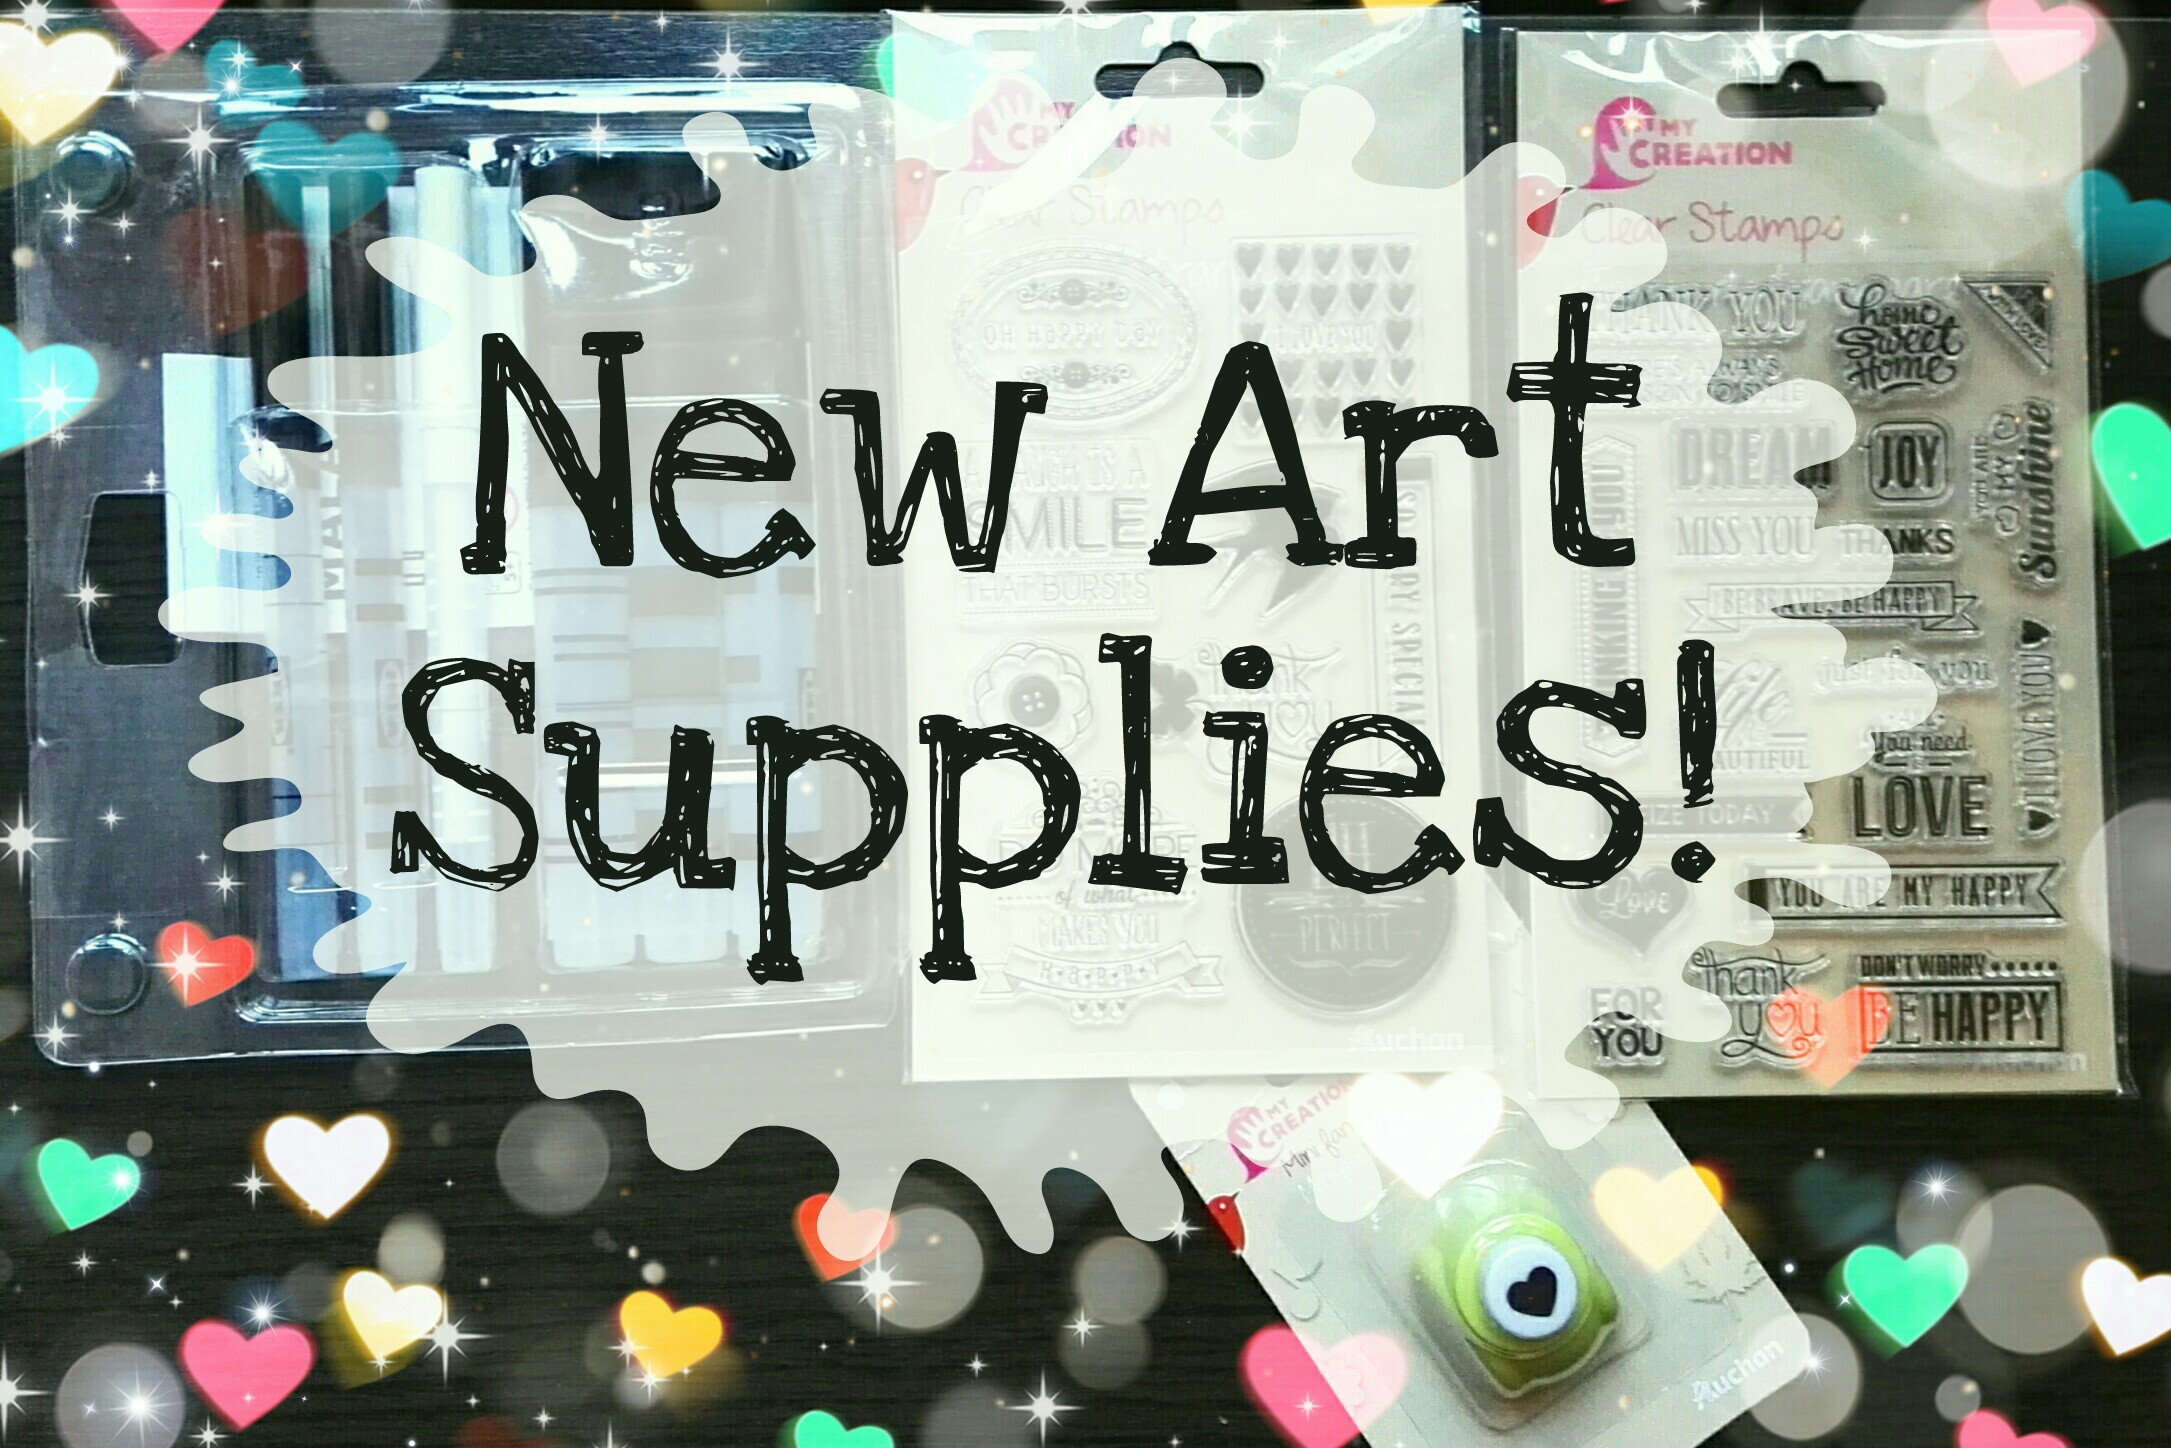 New Art Supplies by Cristina Parus @ creativemag.ro